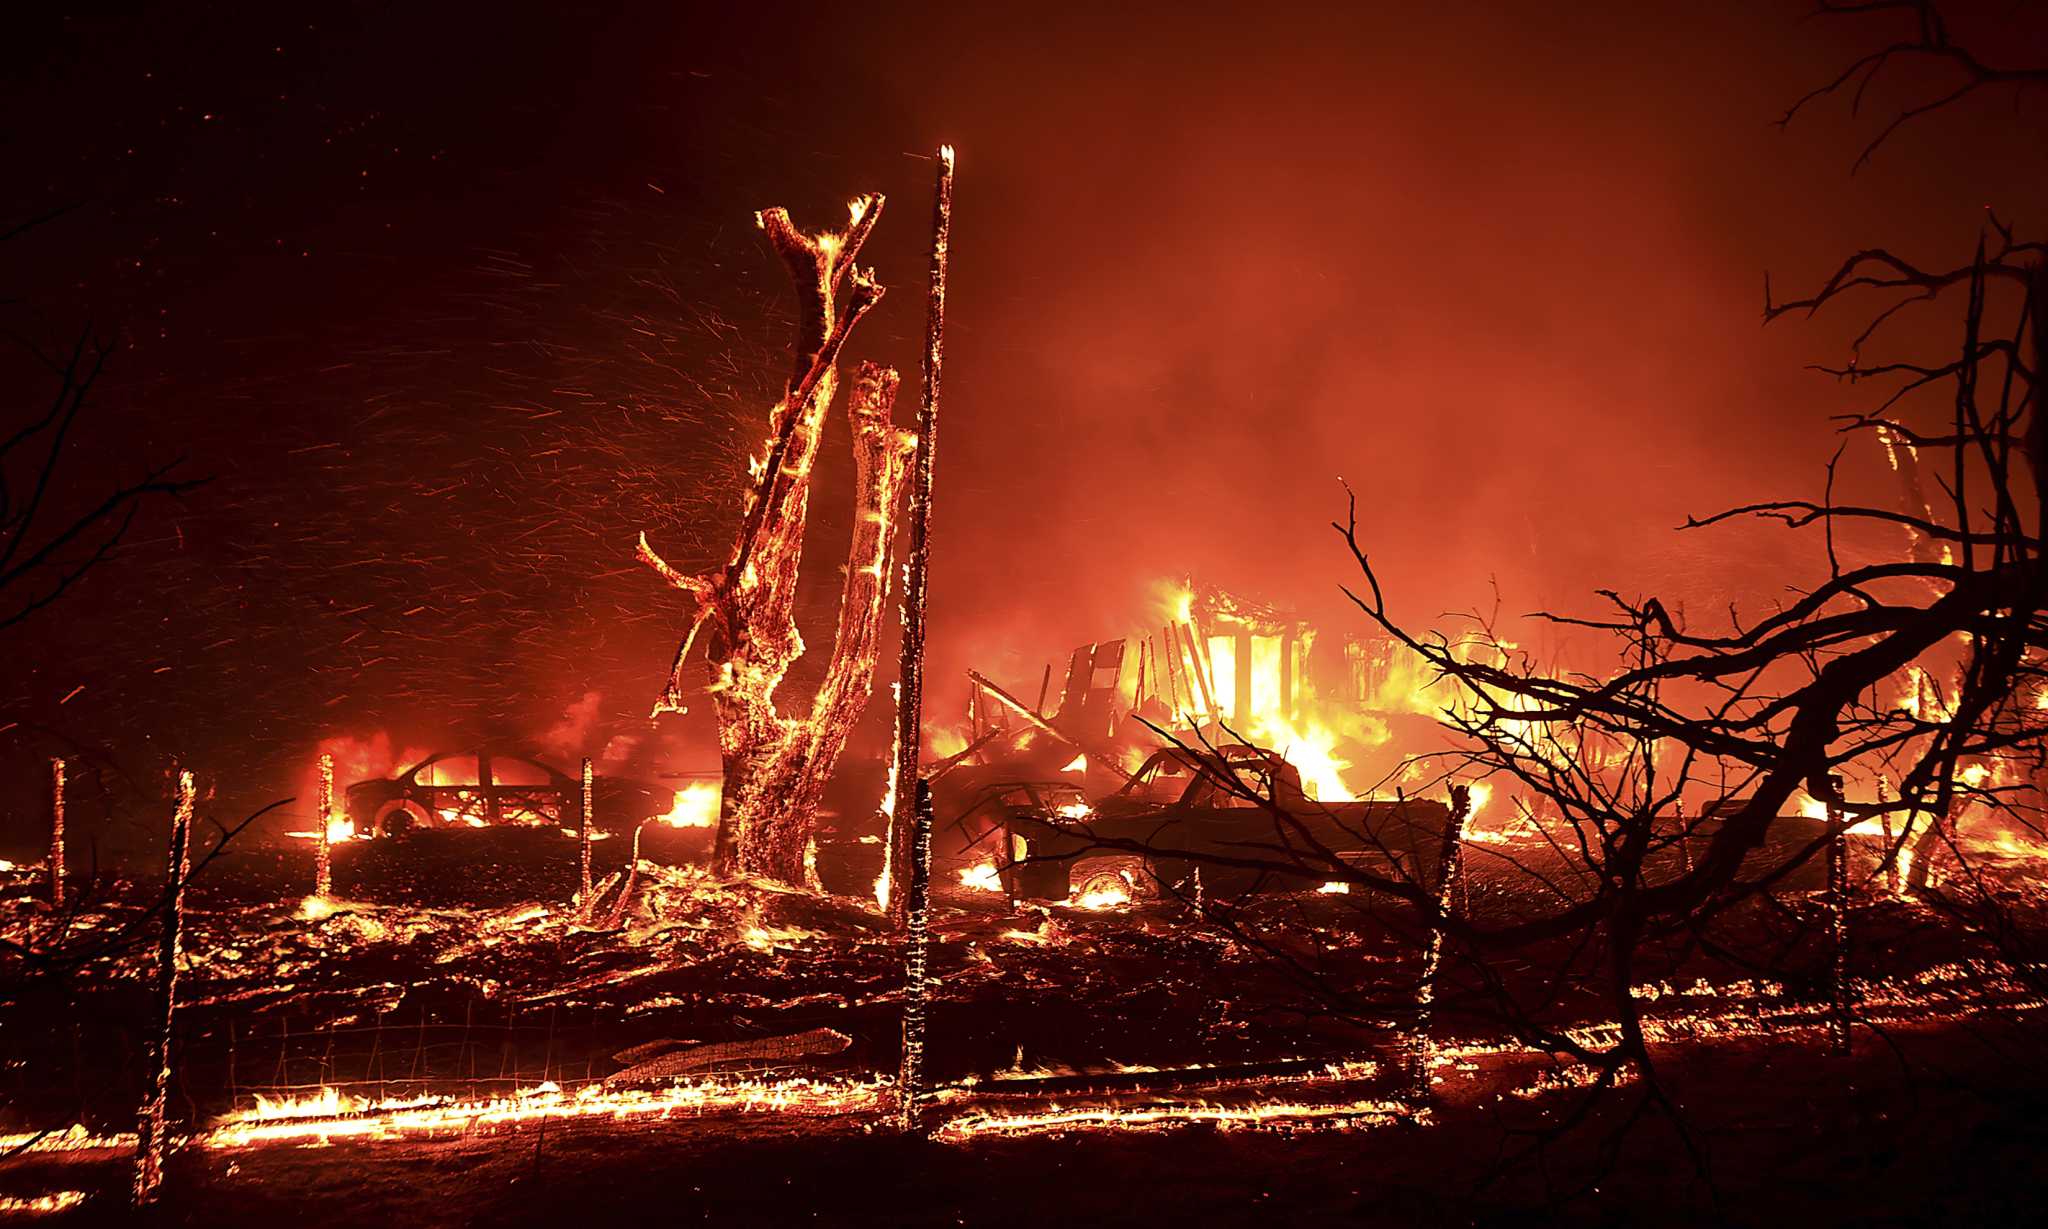 A fire in California scorches thousands of acres east of San Francisco, prompting evacuations